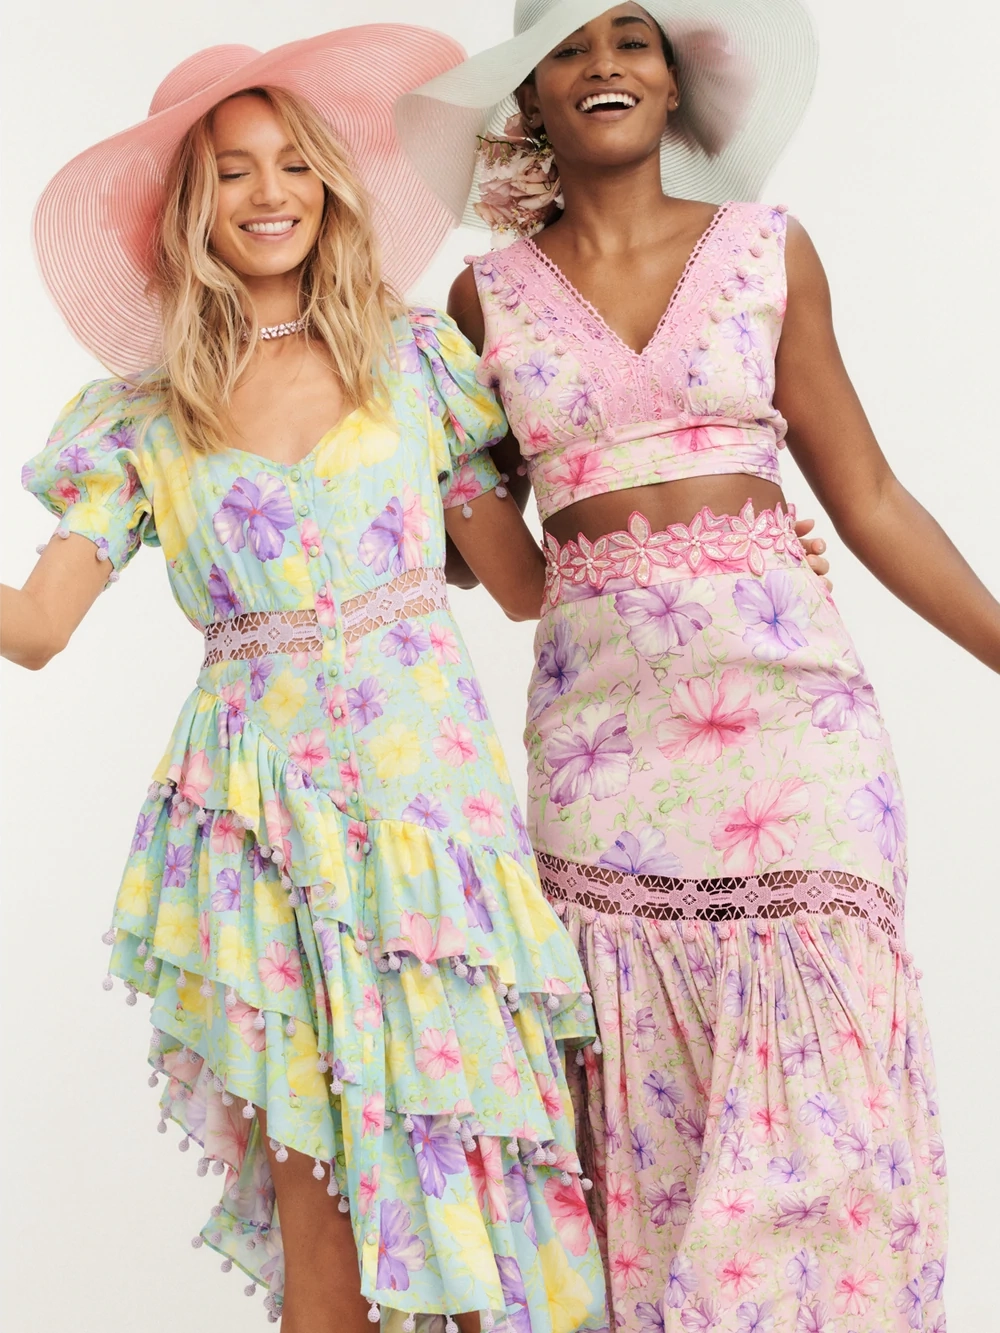 Celebrate Femininty With These Flirty Designs From The Summer '22 LoveShackFancy Lineup